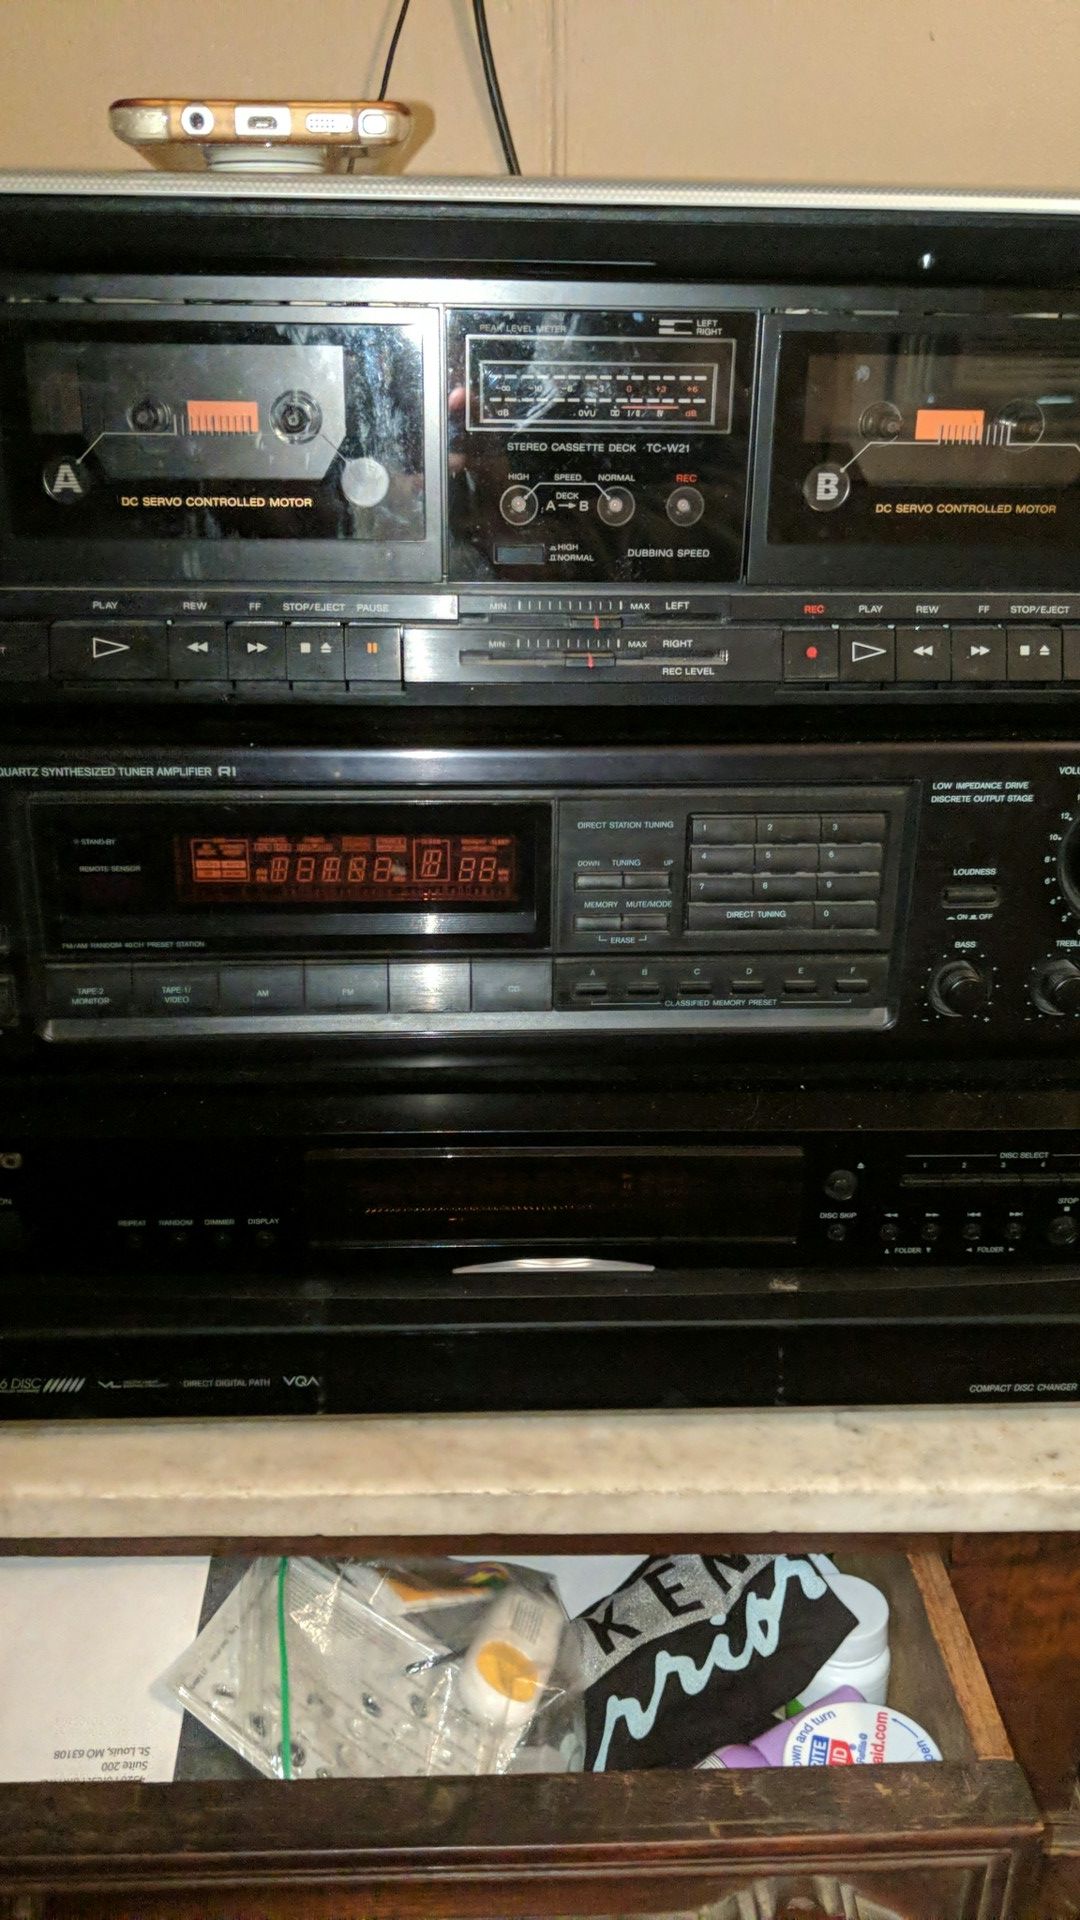 Onkyo stereo Onkyo 5 dics cd changer Sony tape deck have remote control for stereo /cd player